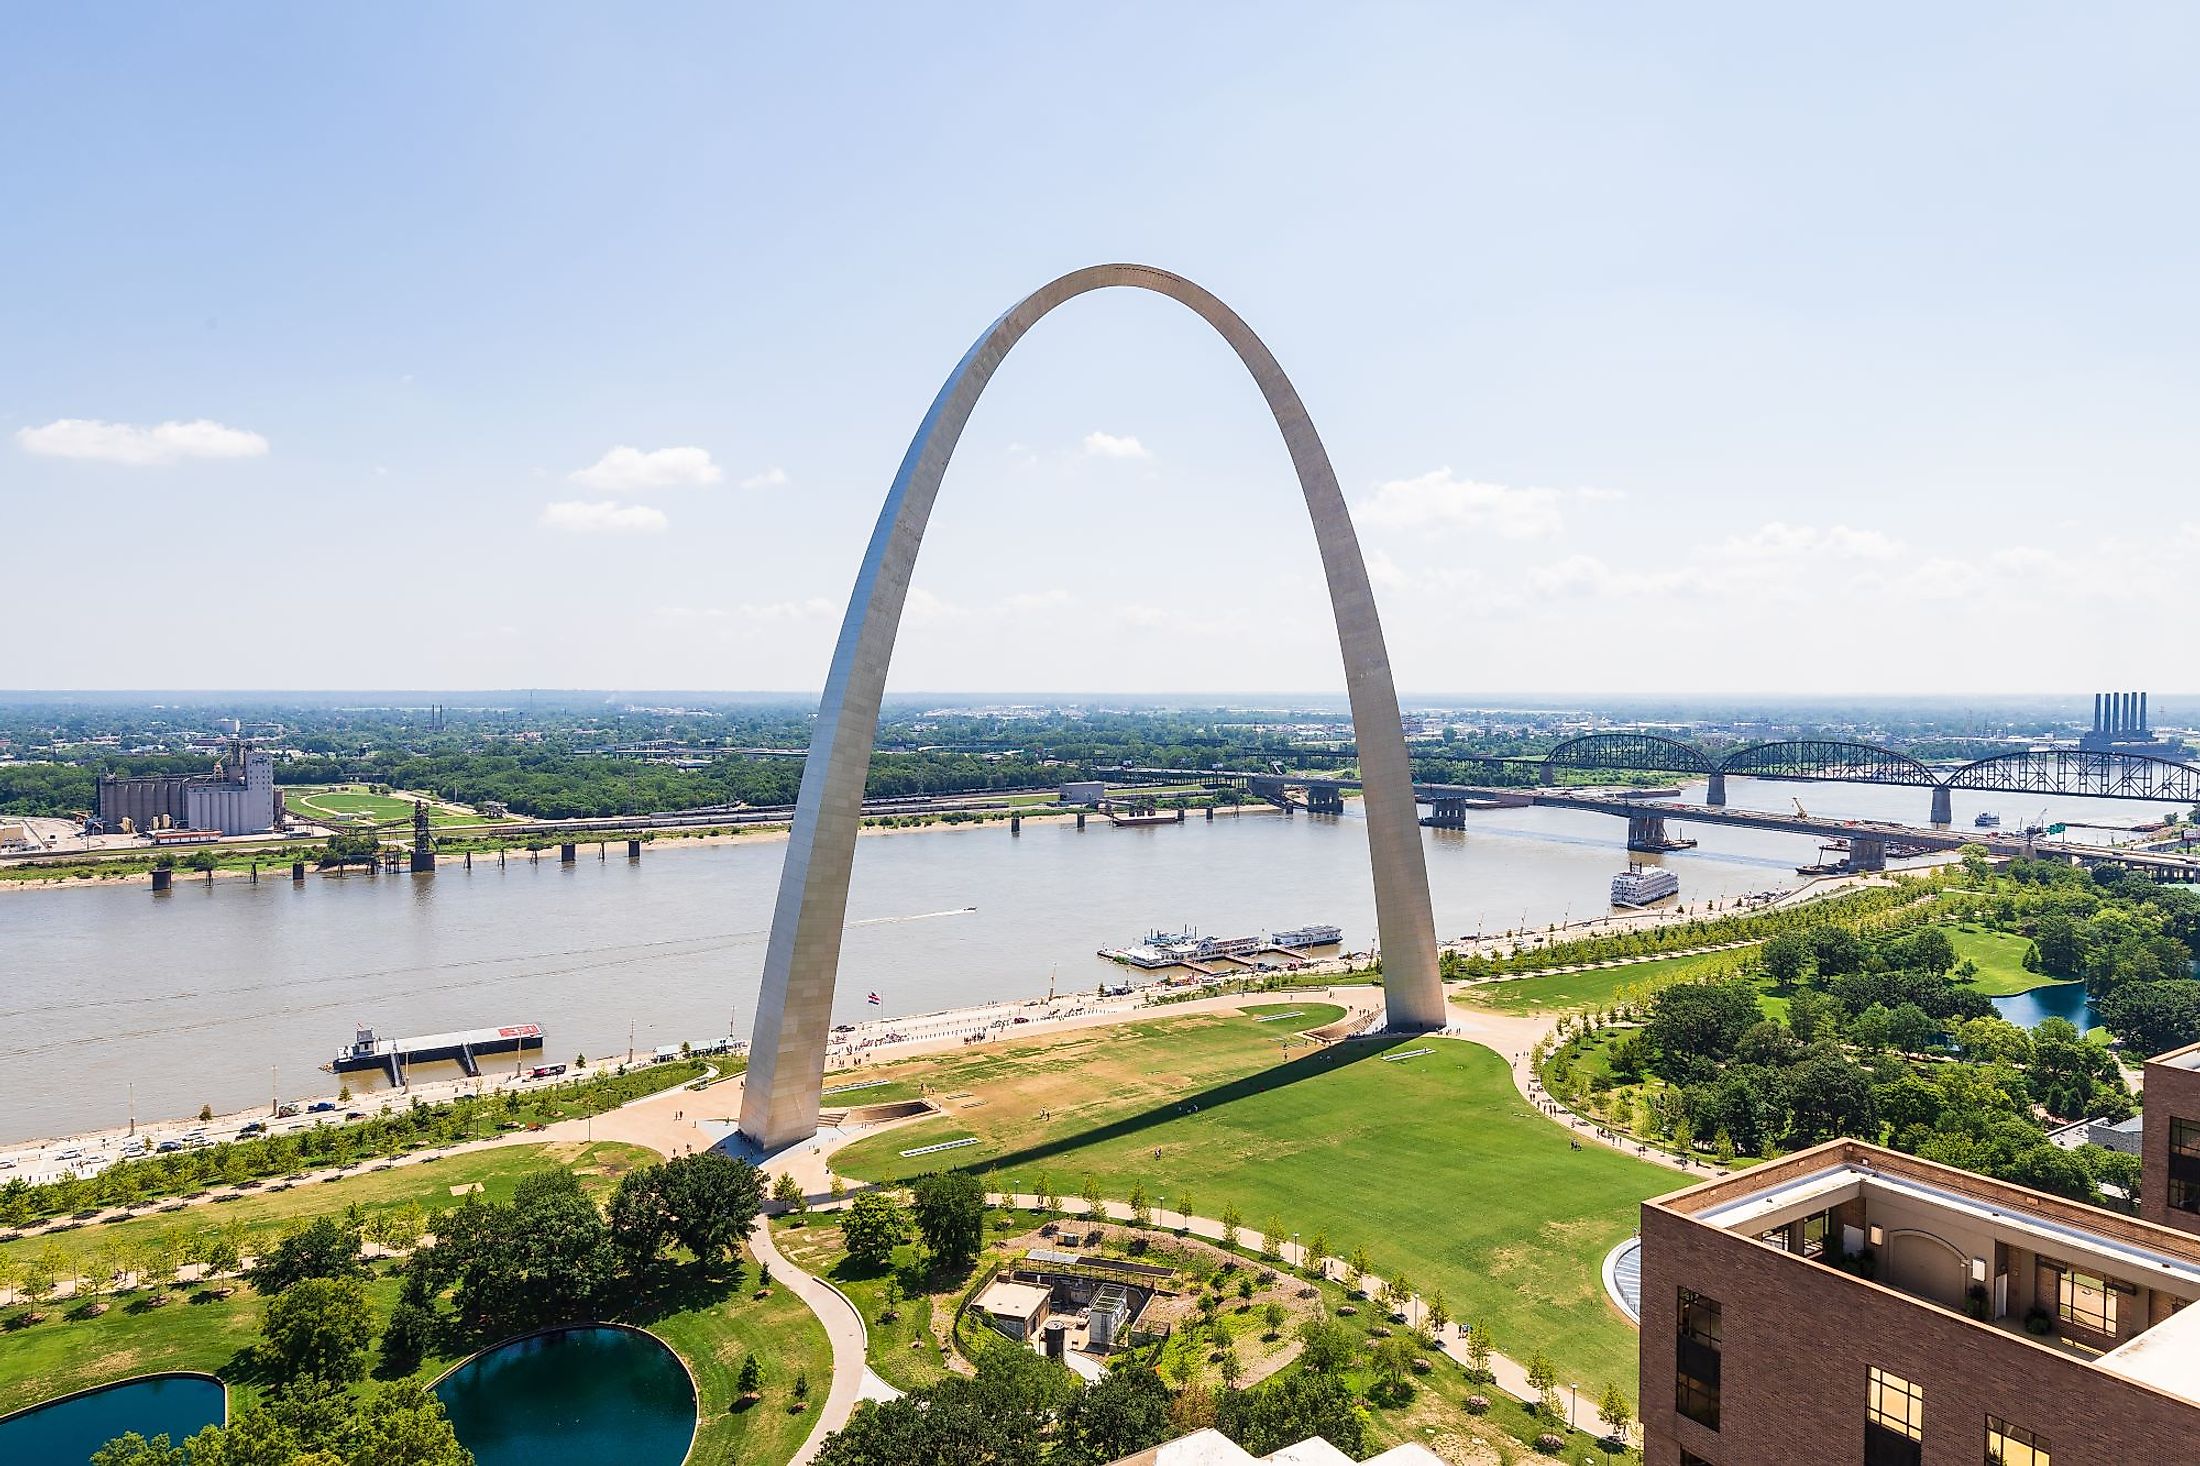 The Gateway Arch on the riverfront of downtown St. Louis. Editorial credit: Joe Hendrickson / Shutterstock.com